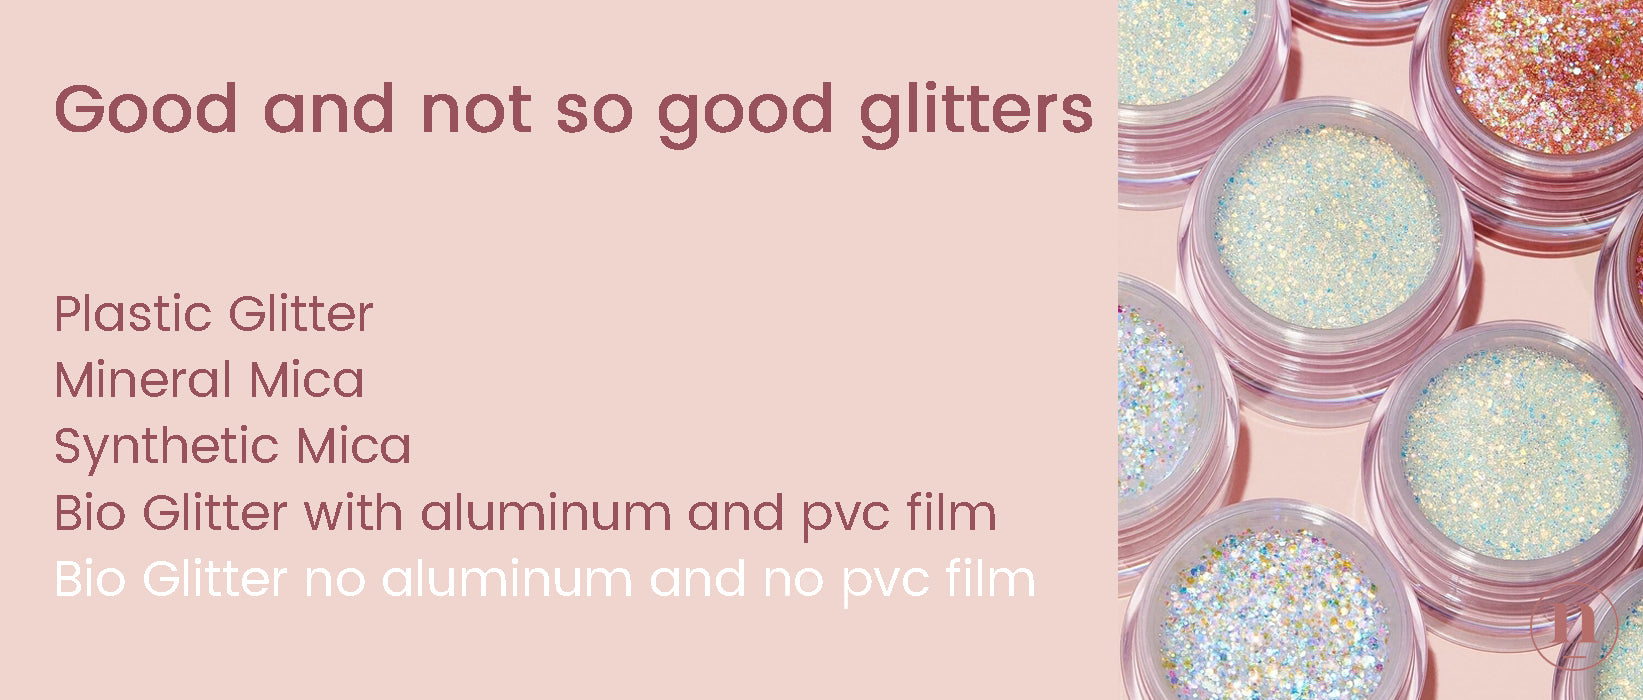 Cosmetic Glitter VS Craft Glitter. You Can Have Both in One